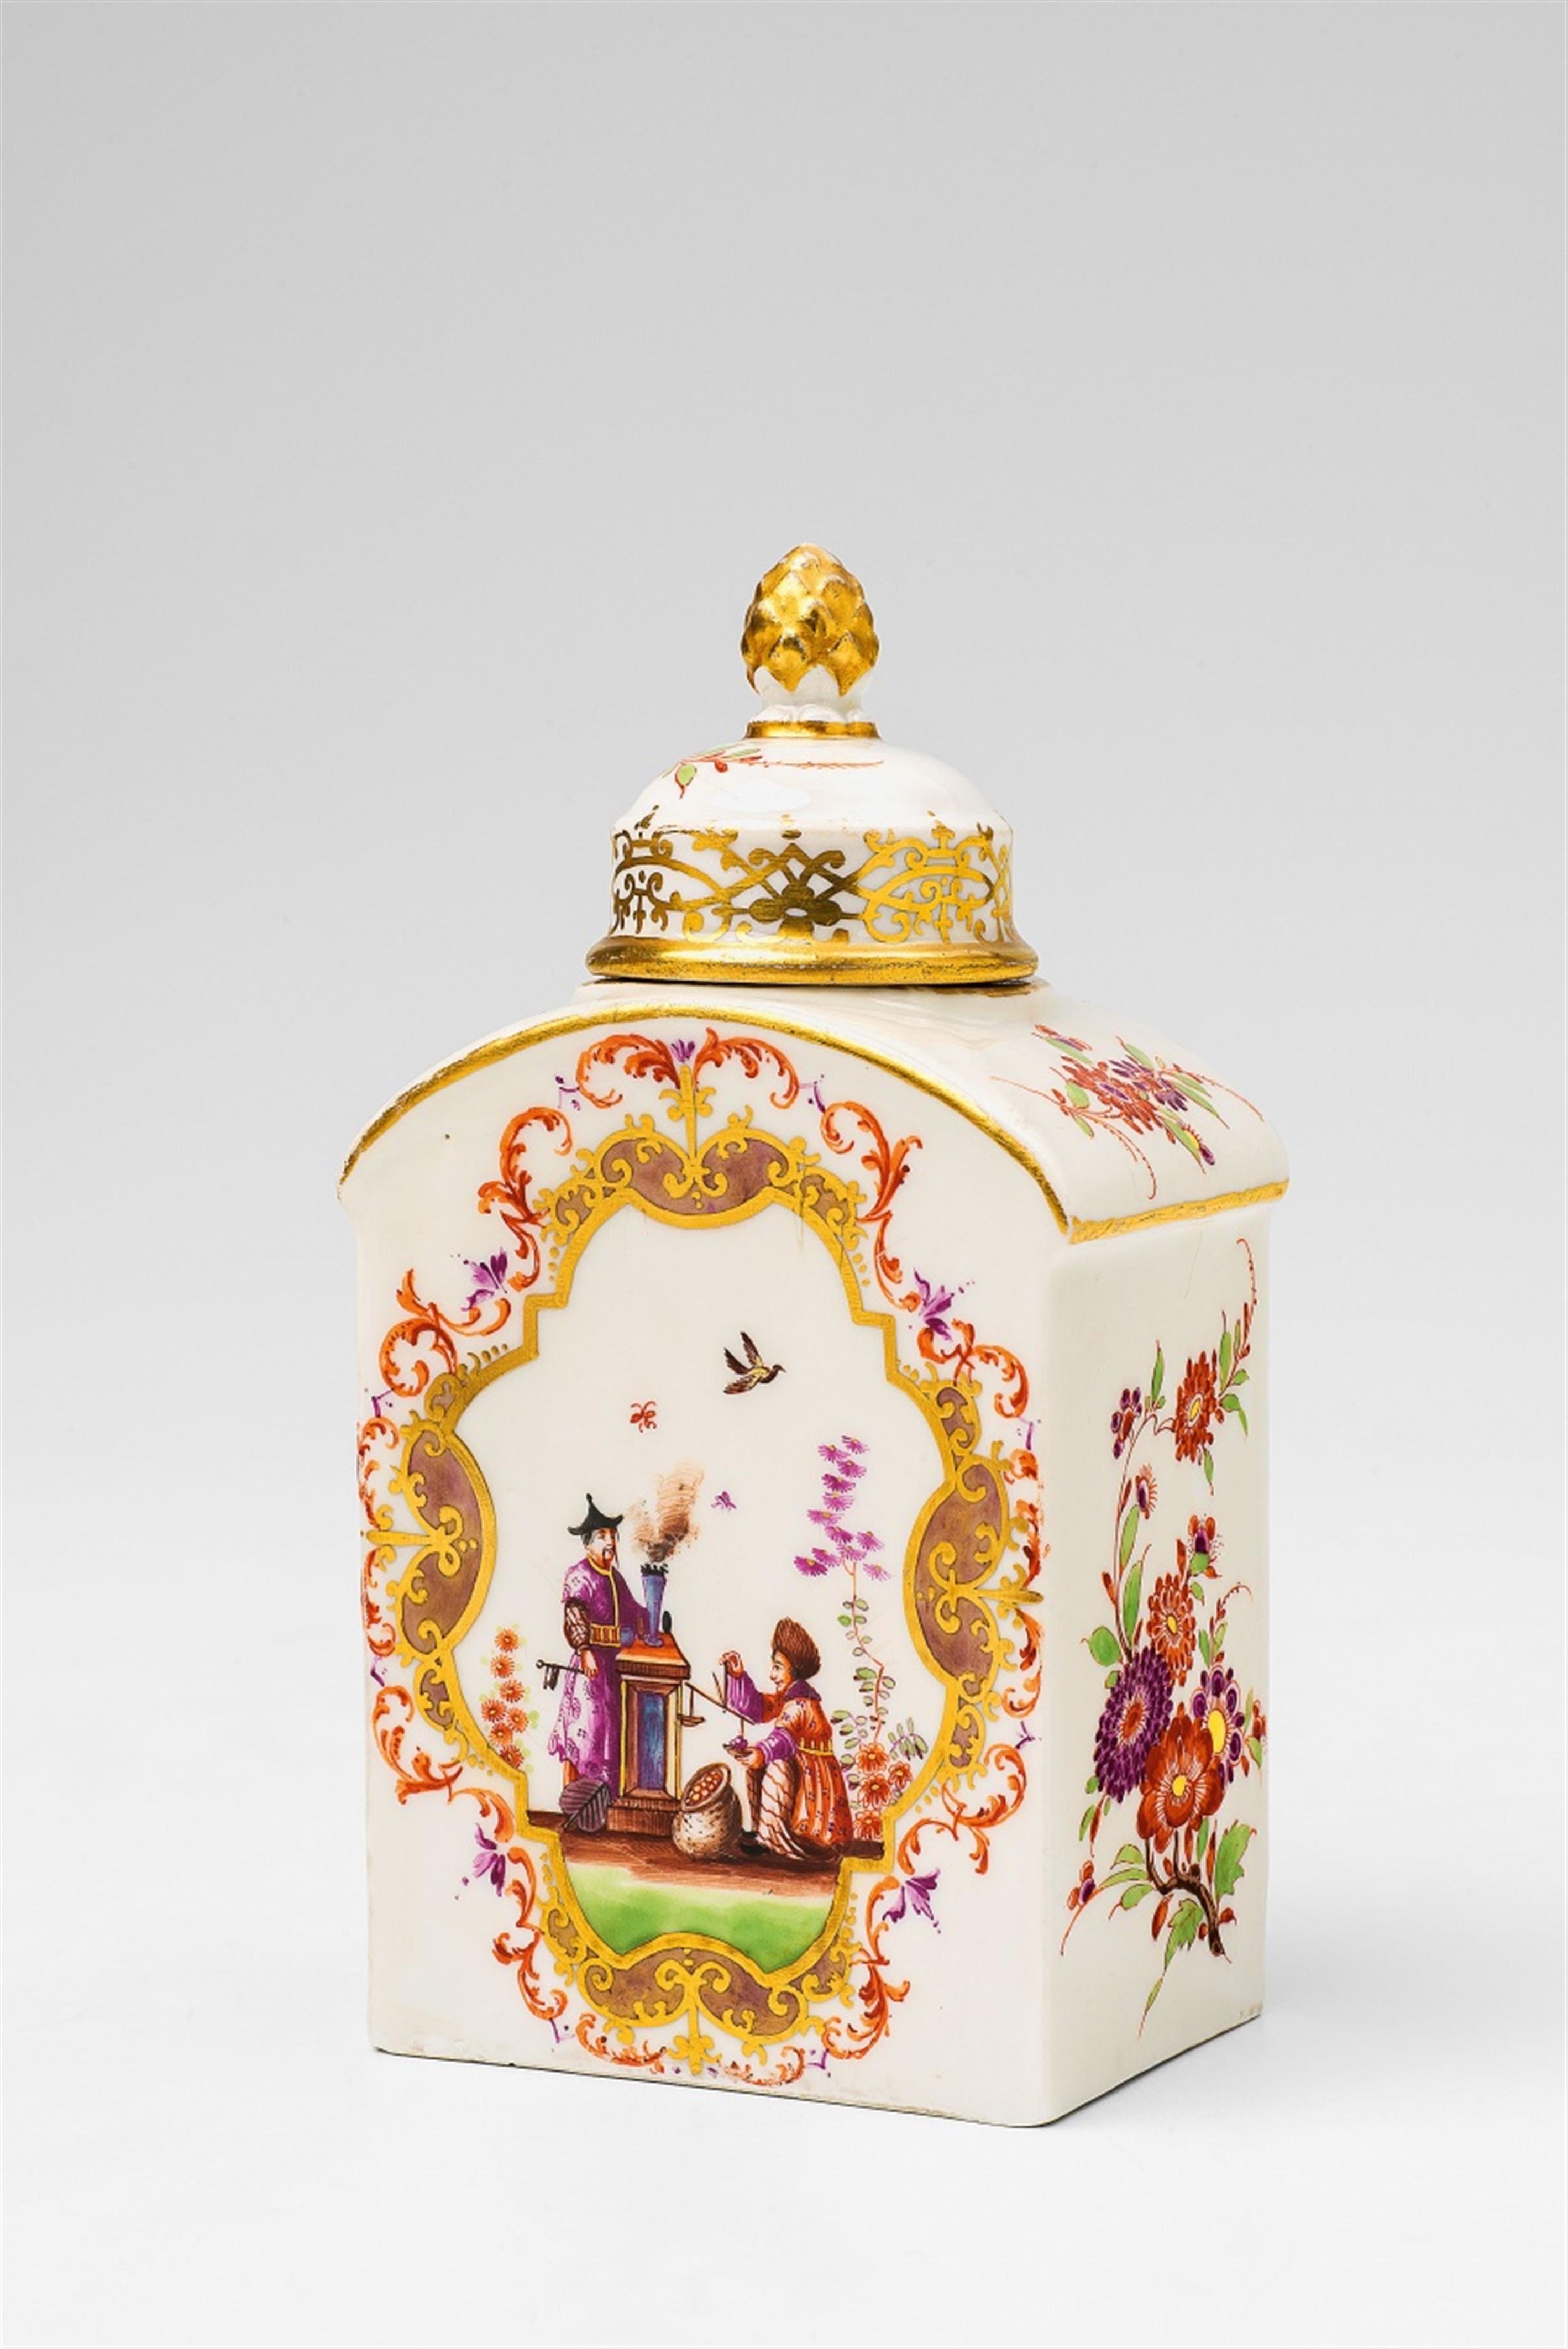 A Meissen porcelain tea caddy with Hoeroldt chinoiseries - image-1